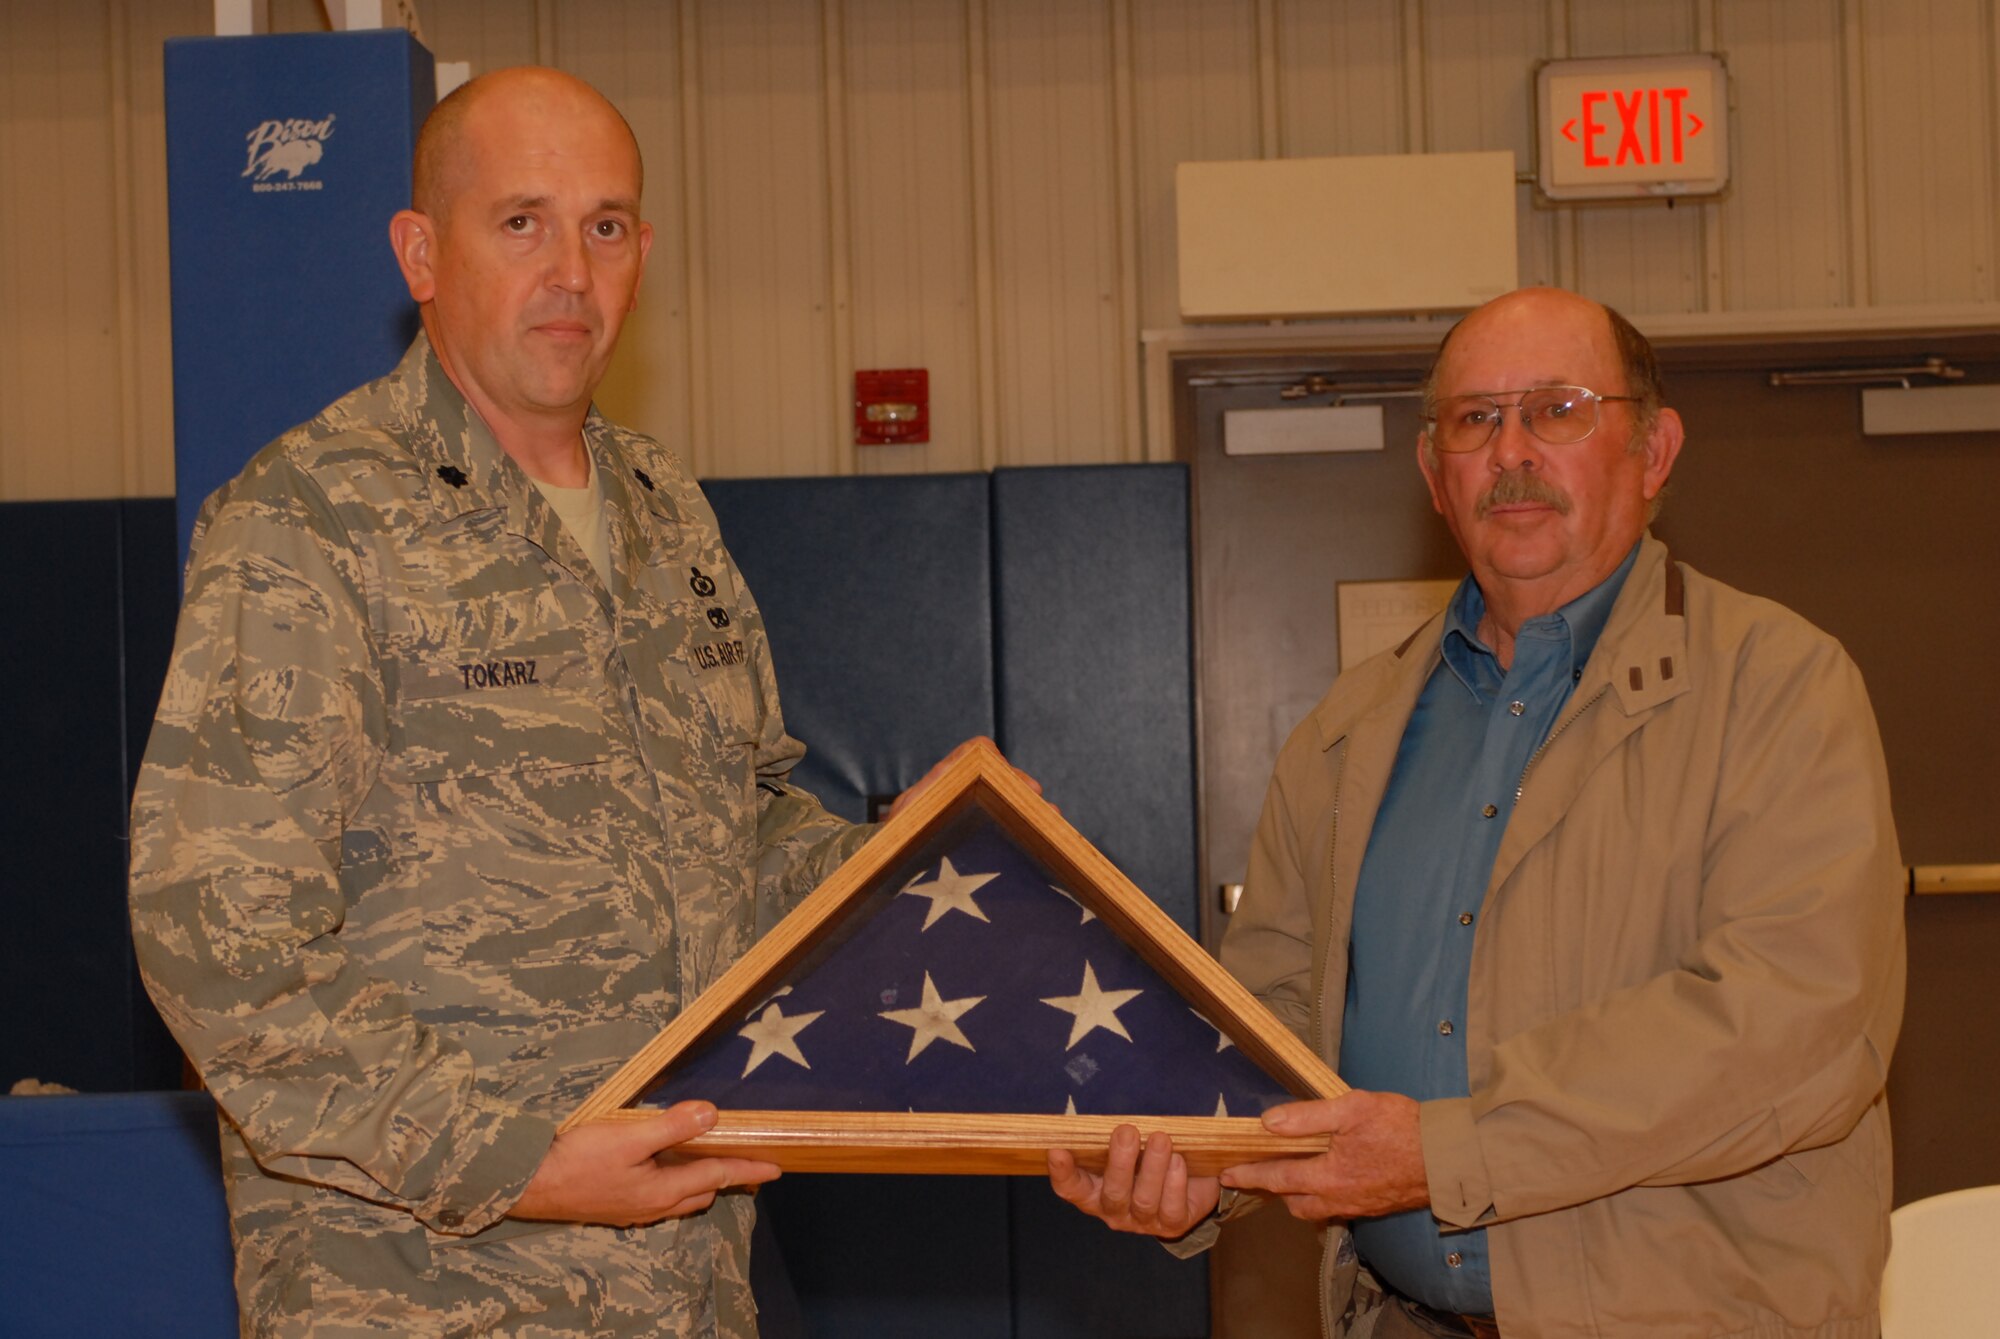 Lt Col Mike Tokarz, 134 ACS Commander, presents the recovered flag to Mr. Gene West, Chariman of the County Commissioners and fifth generation Greensburg resident.  